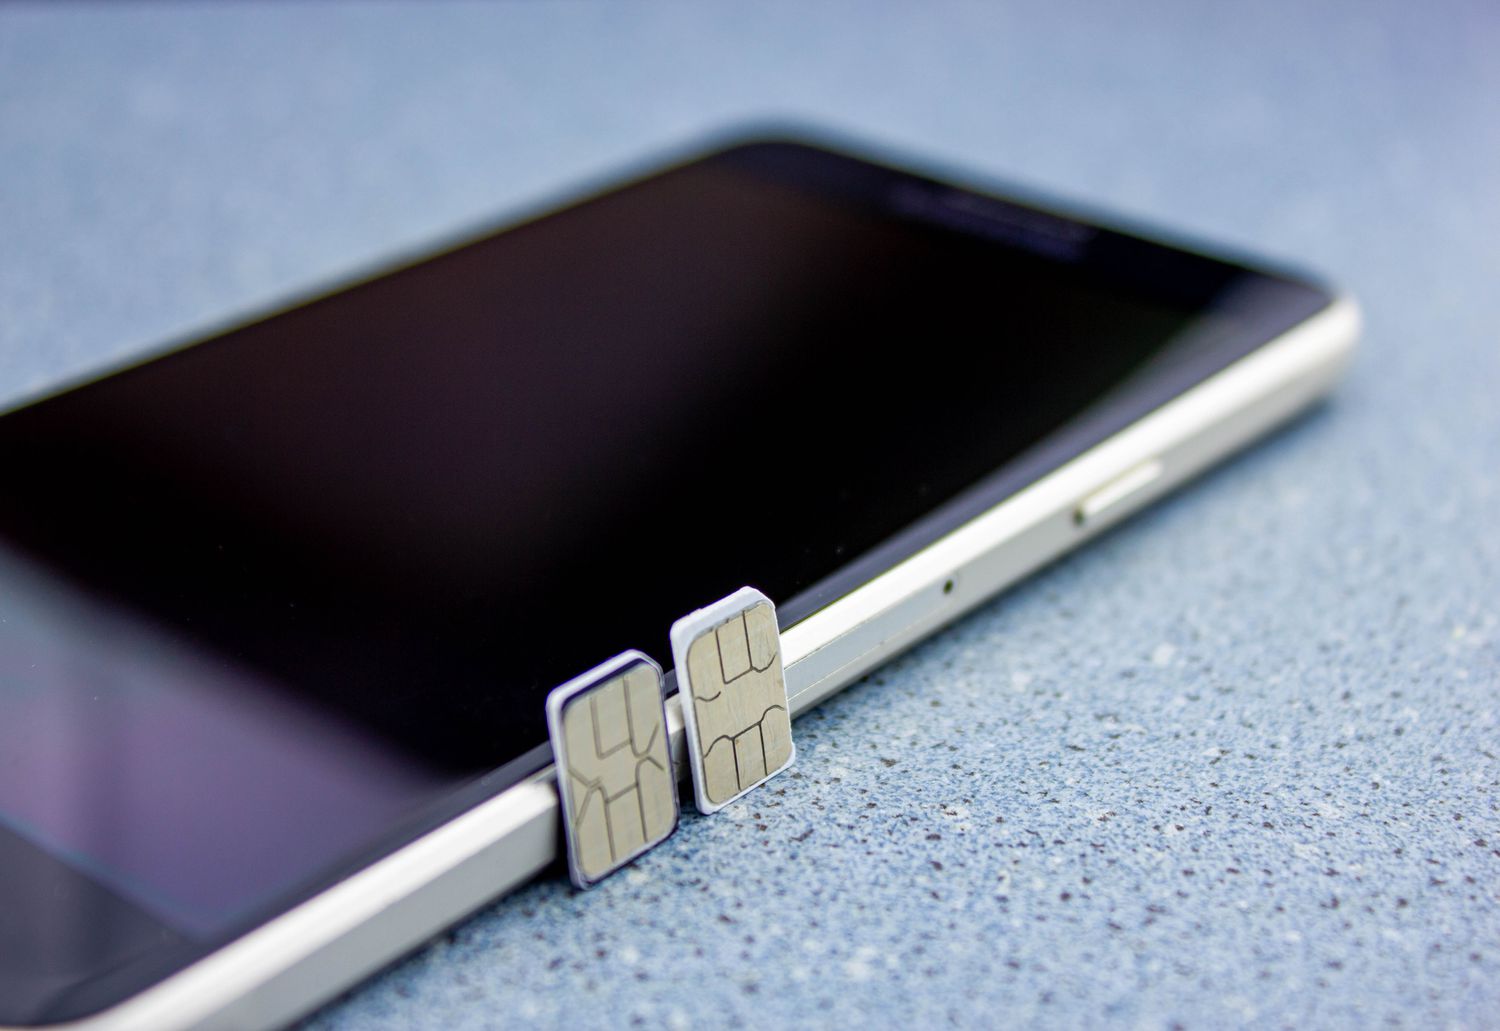 Switching SIM Cards Without Losing Your Number